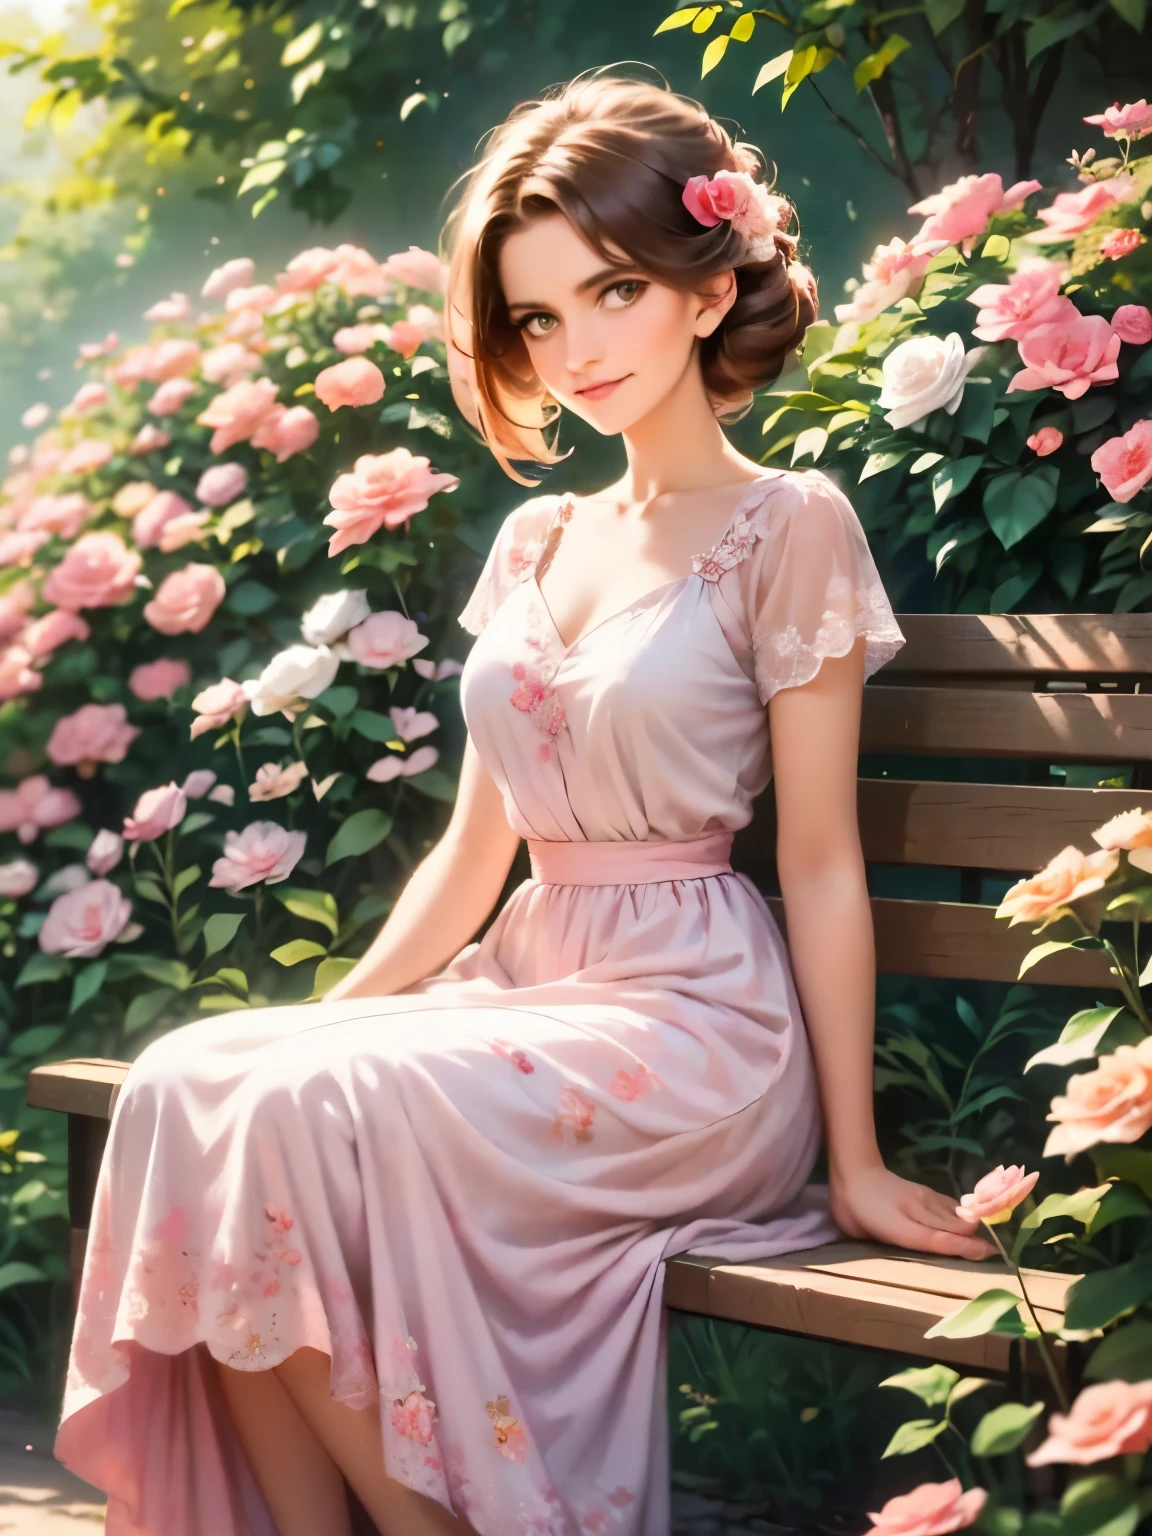 arafed woman in a dress sitting on a bench in a garden, a colorized photo by Evaline Ness, flickr, romanticism, 1 9 5 0 s style, 5 0 s style, 50s style, dressed in a flower dress, wearing pink floral gown, flower dress, wearing a wonderful dress, in a dress, retro 5 0 s style